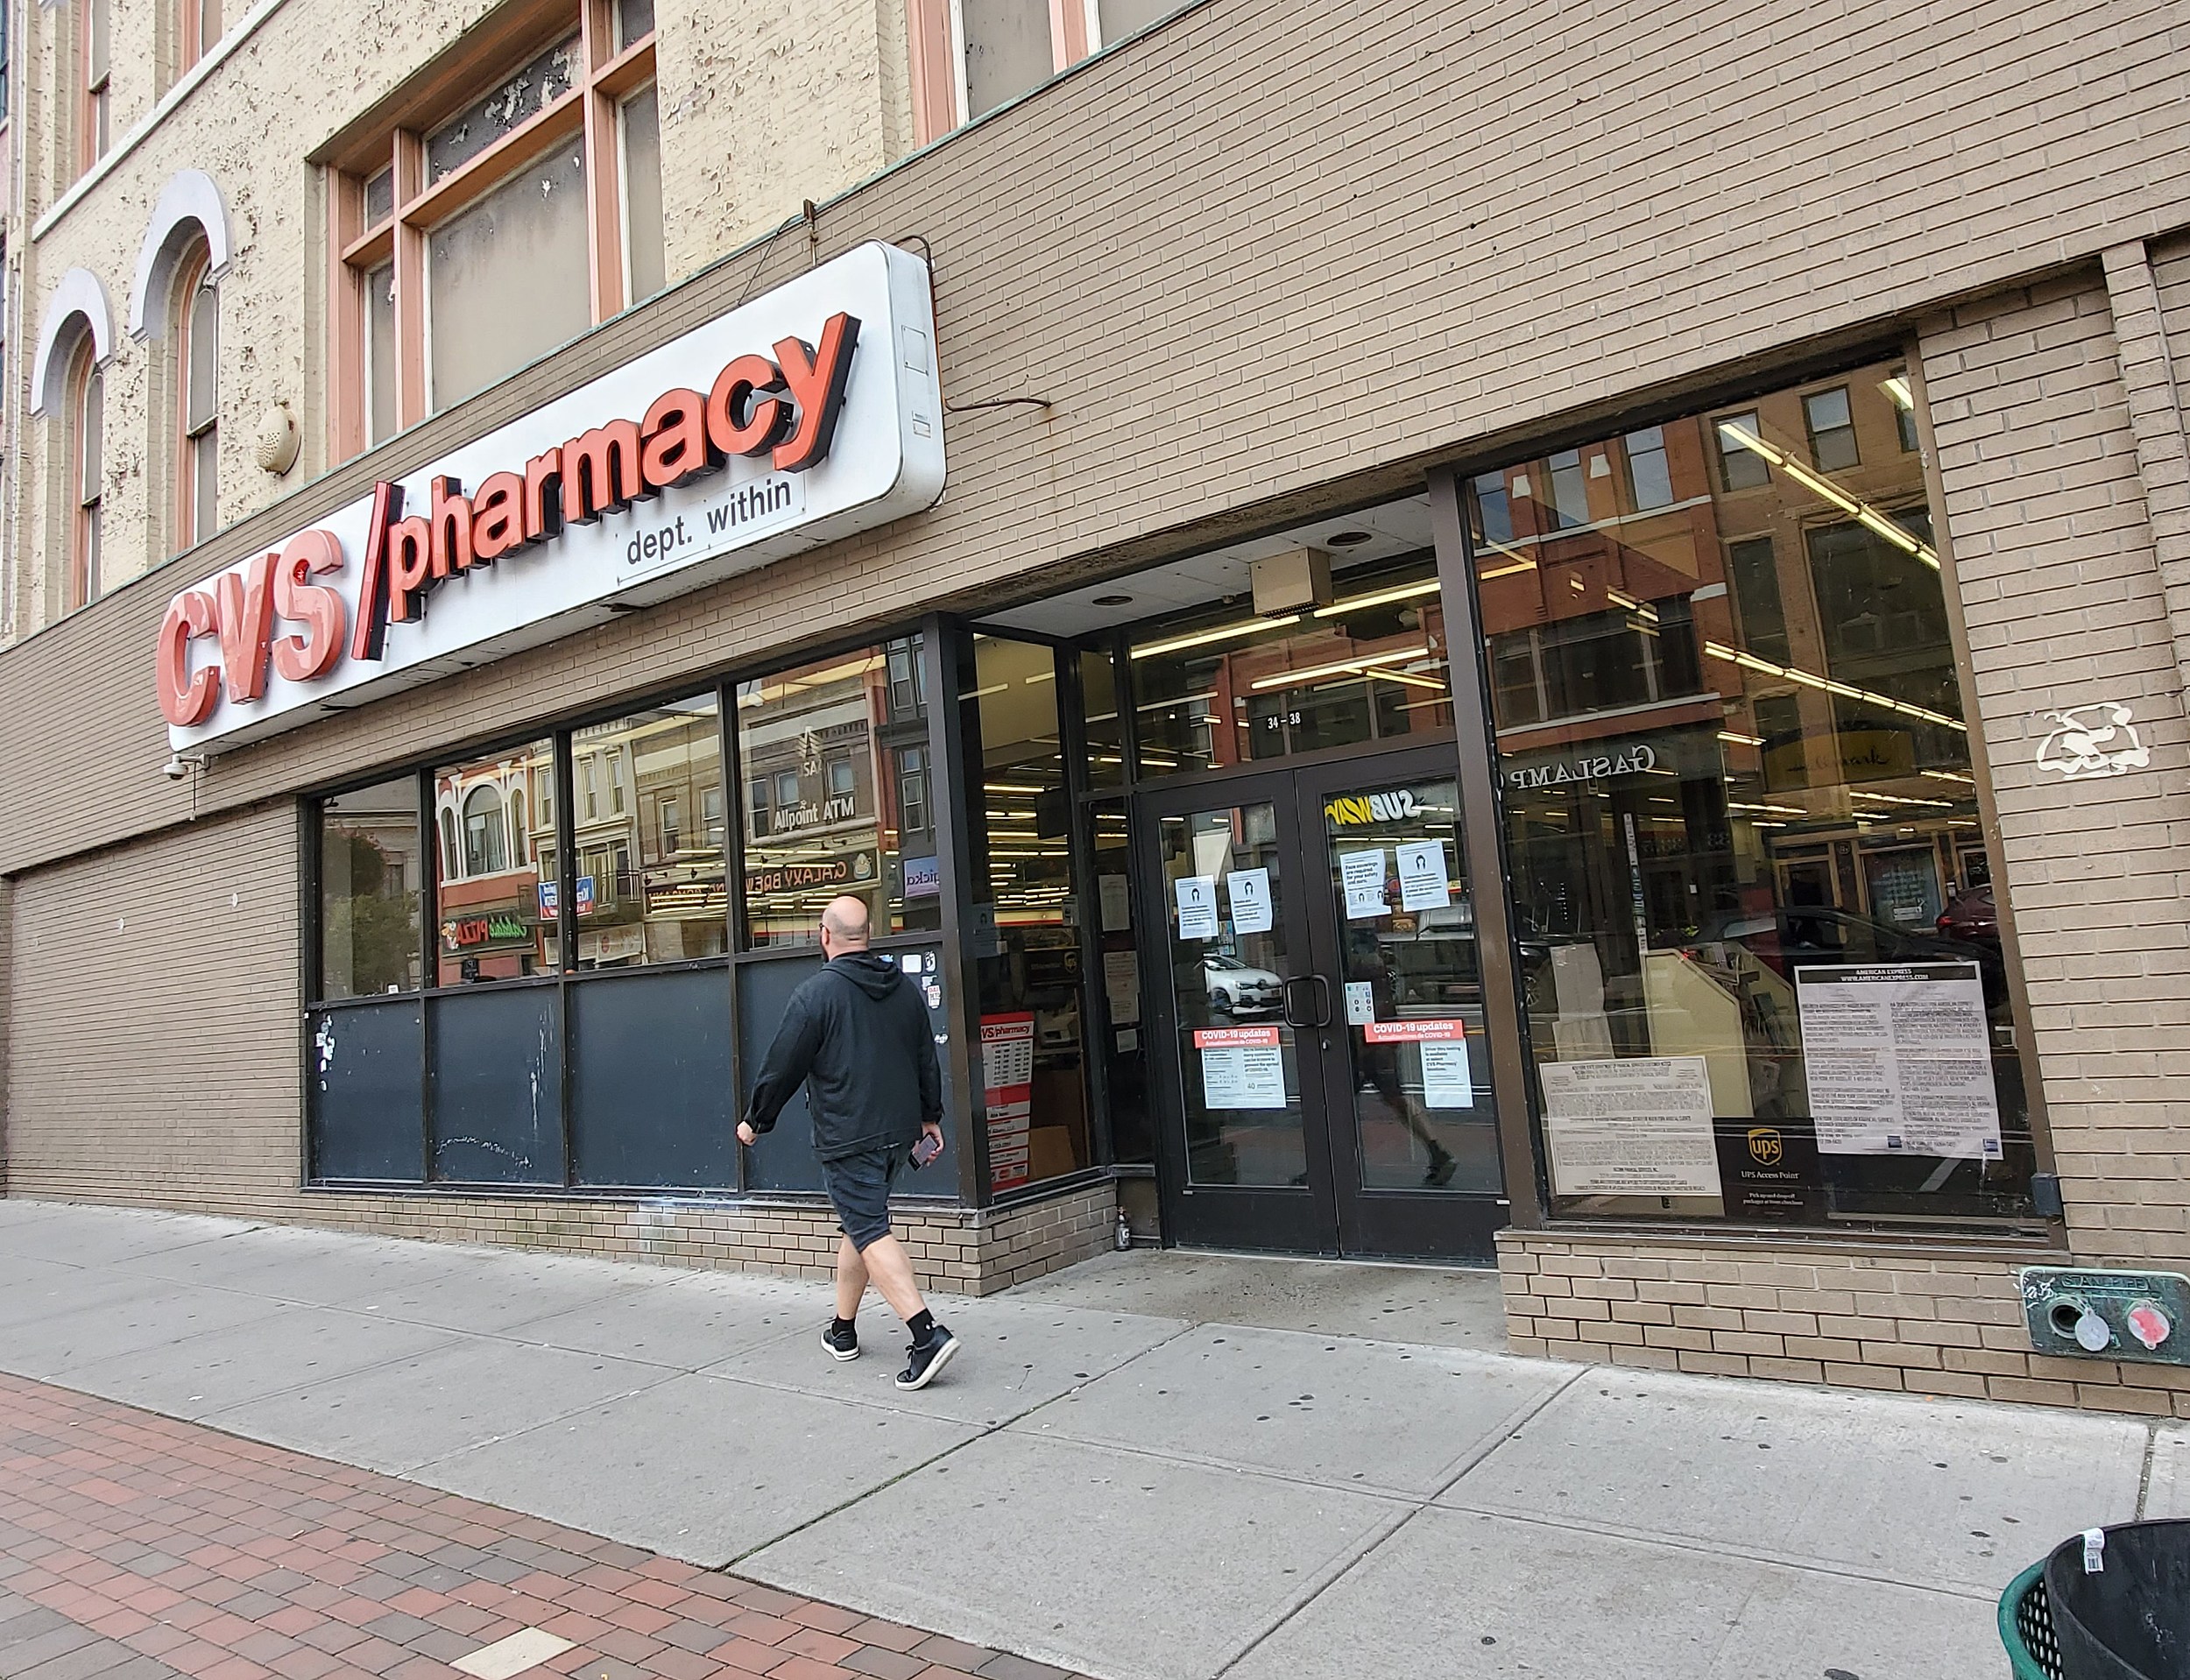 After 97 Years, Court Street Site Will No Longer Have Drug Store